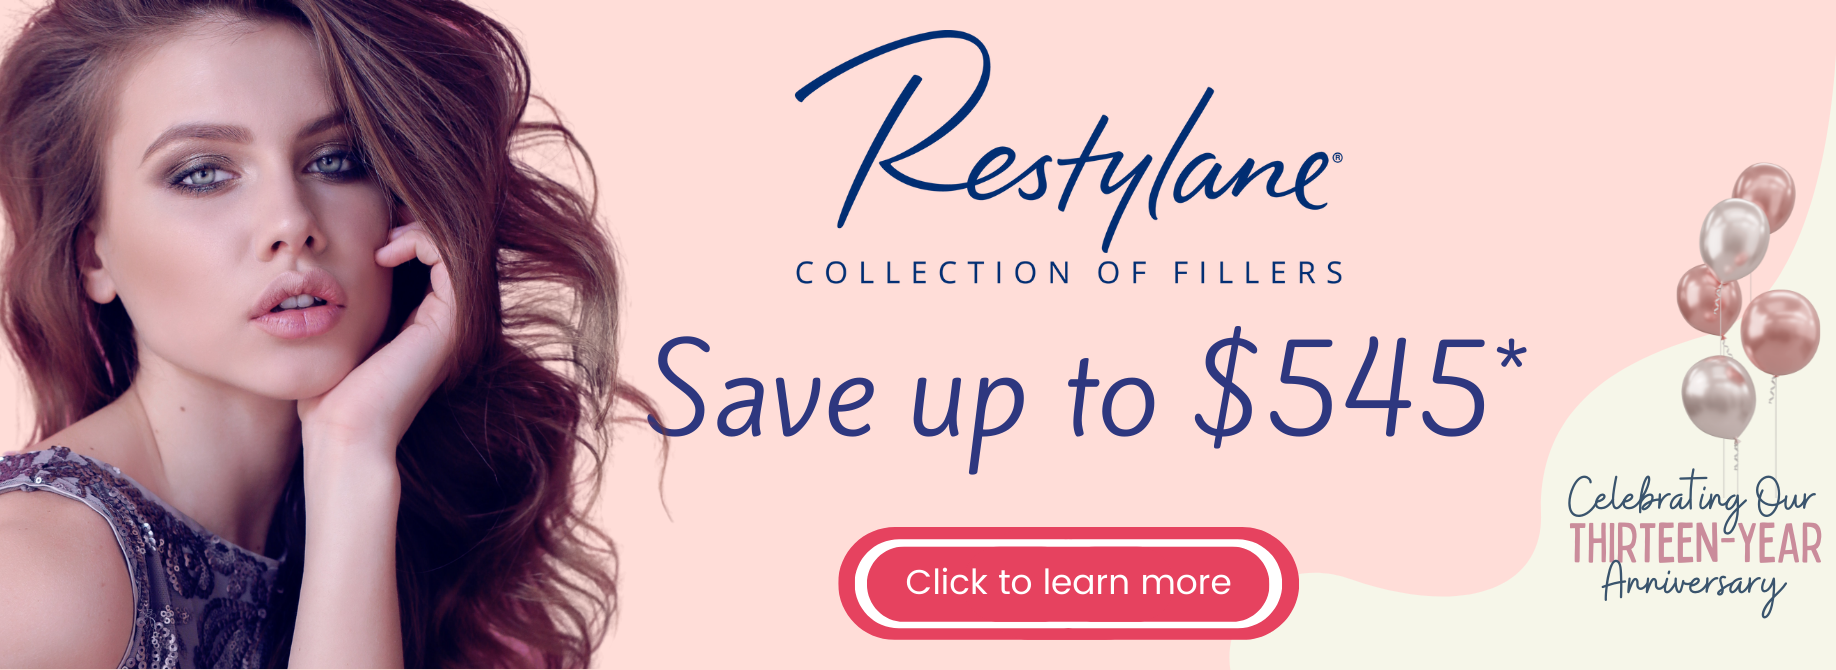 South Tampa restylane